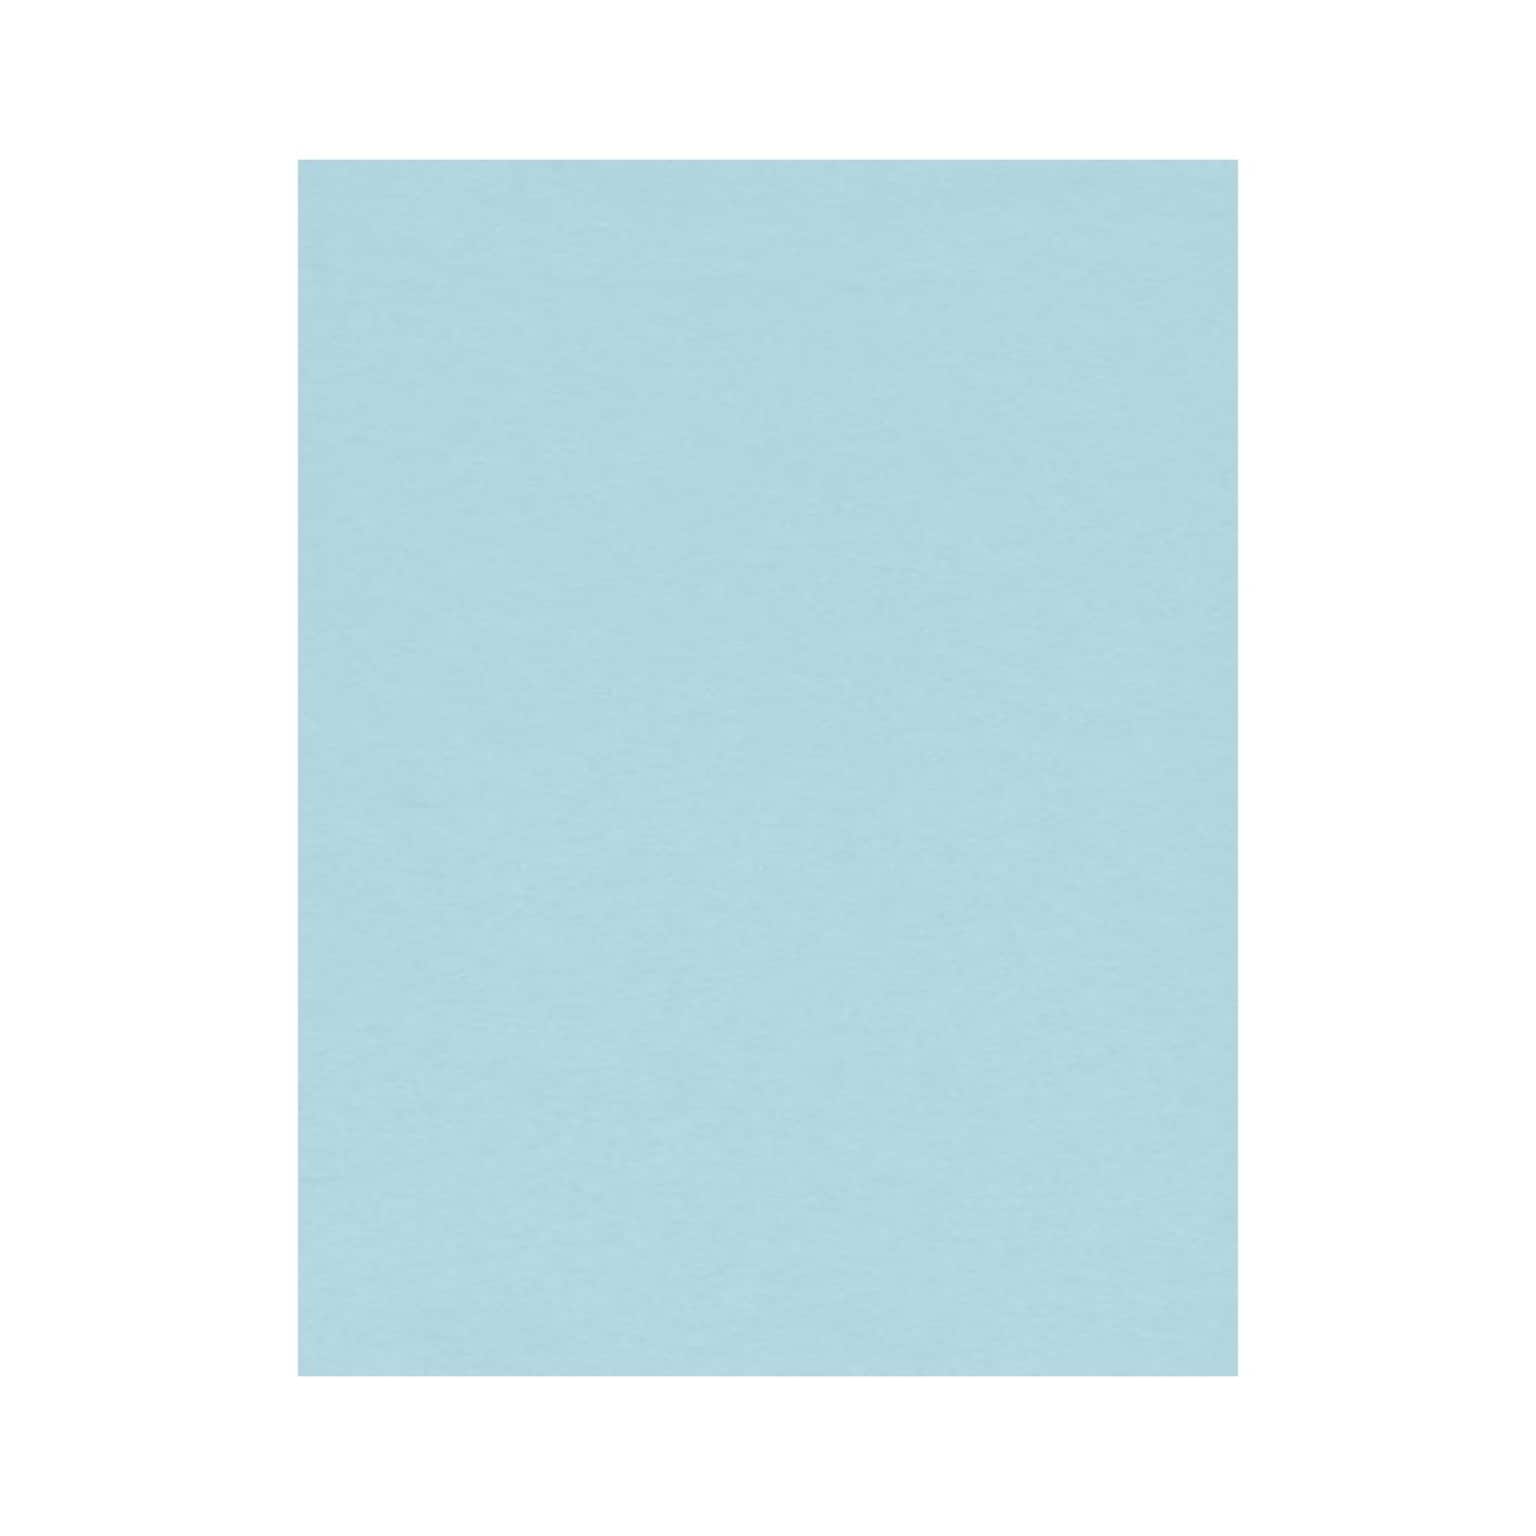 LUX Colored Paper, 28 lbs., 8.5 x 11, Pastel Blue, 250 Sheets/Pack (81211-P-64-250)